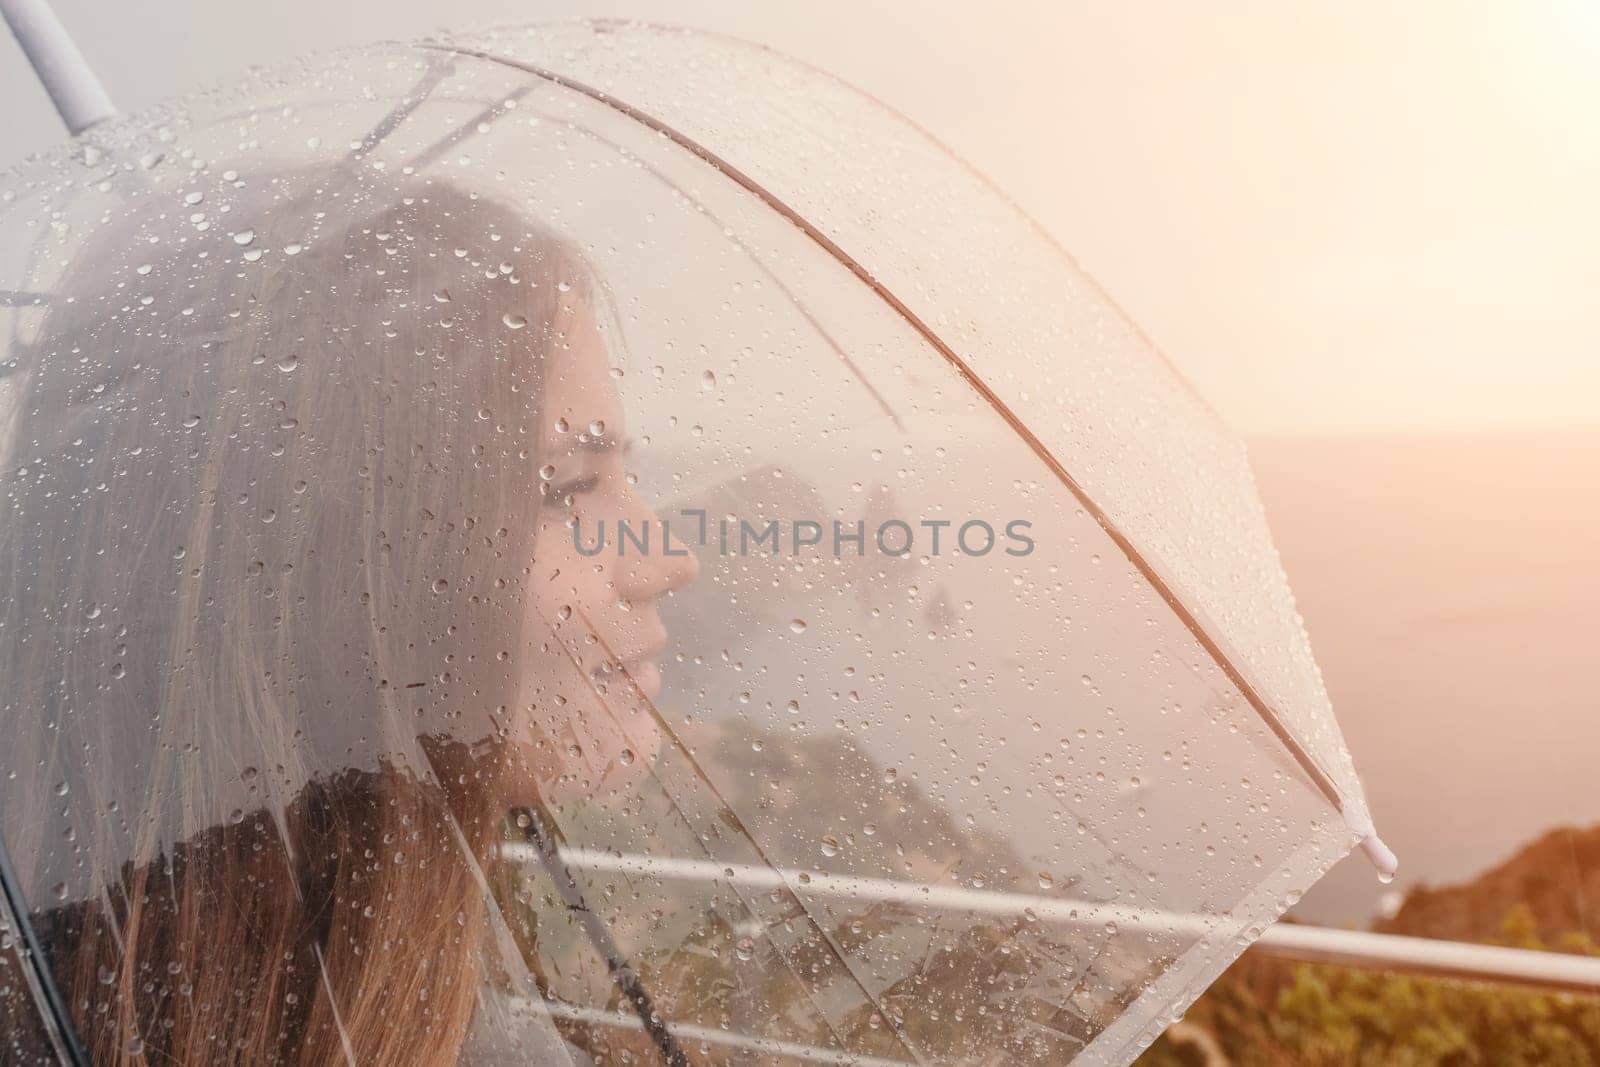 Woman rain umbrella. Happy woman portrait wearing a raincoat with transparent umbrella outdoors on rainy day in park near sea. Girl on the nature on rainy overcast day. by panophotograph